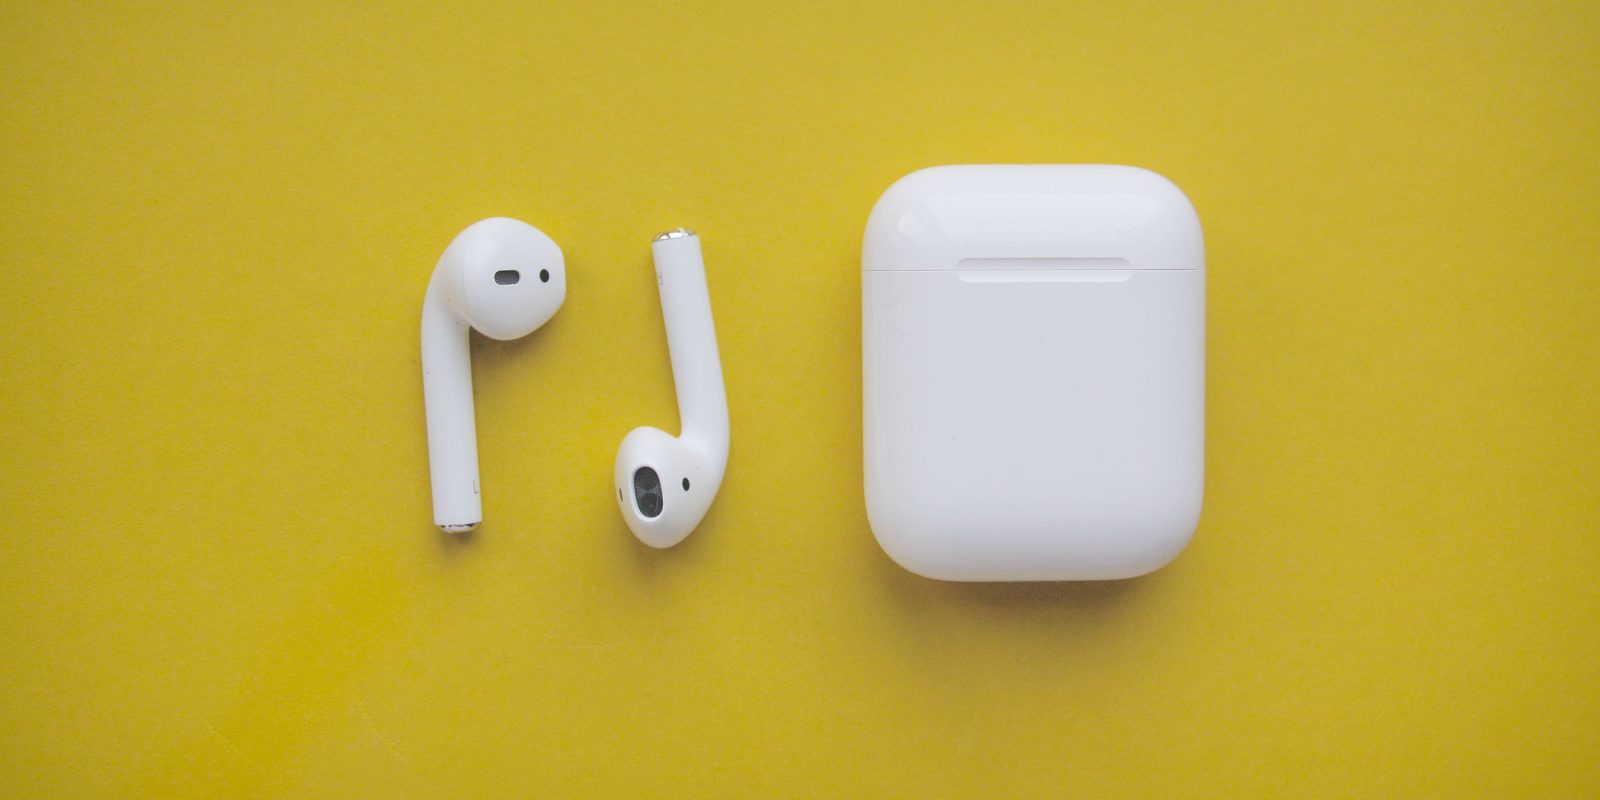 Fake AirPods cost Apple $3B